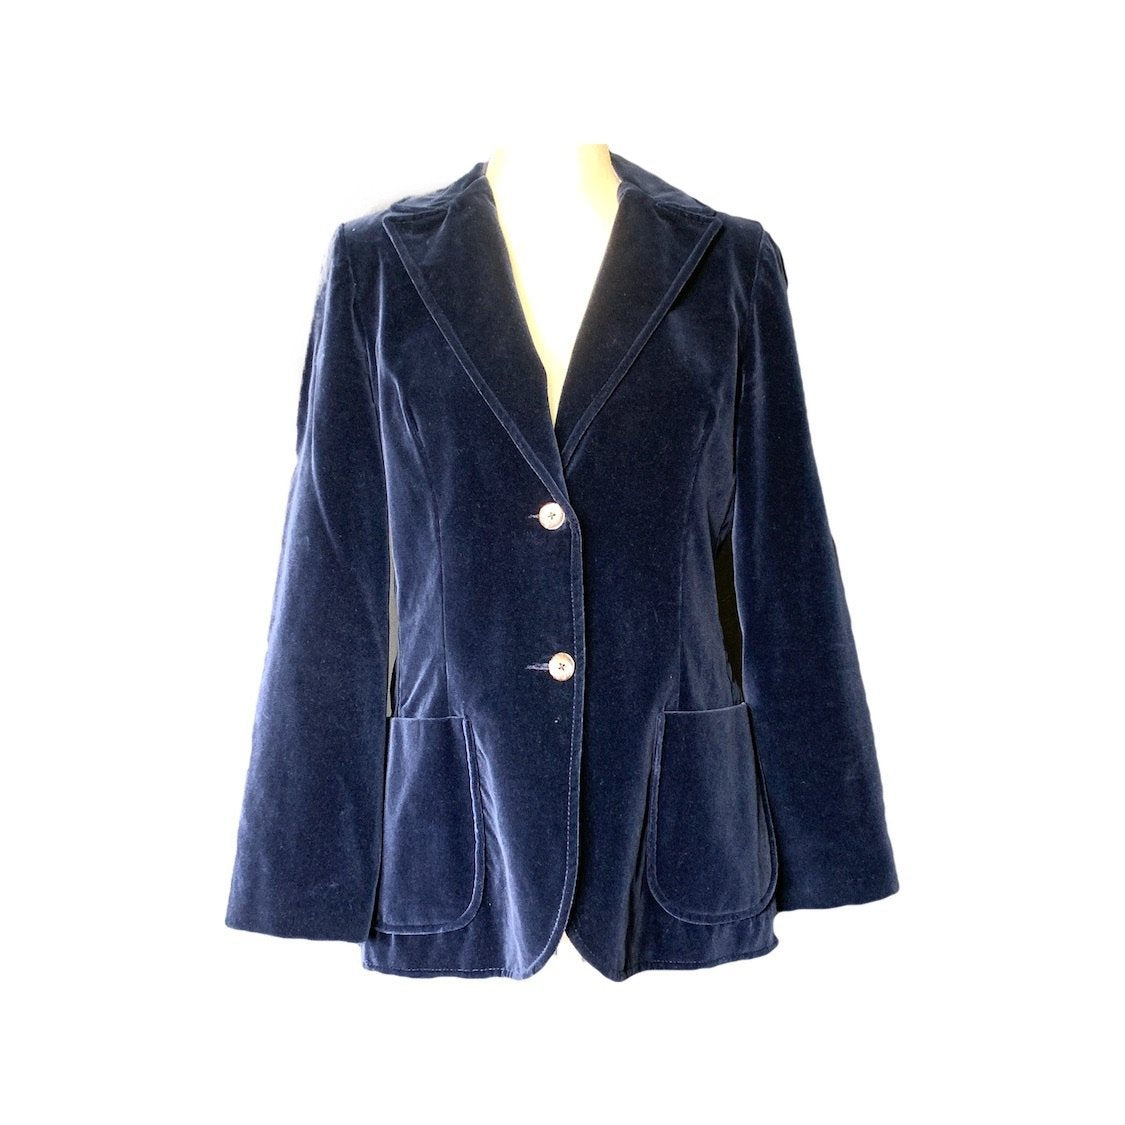 1970s Blue Velvet Blazer by Koret. Perfect Statement Piece for Fall. S